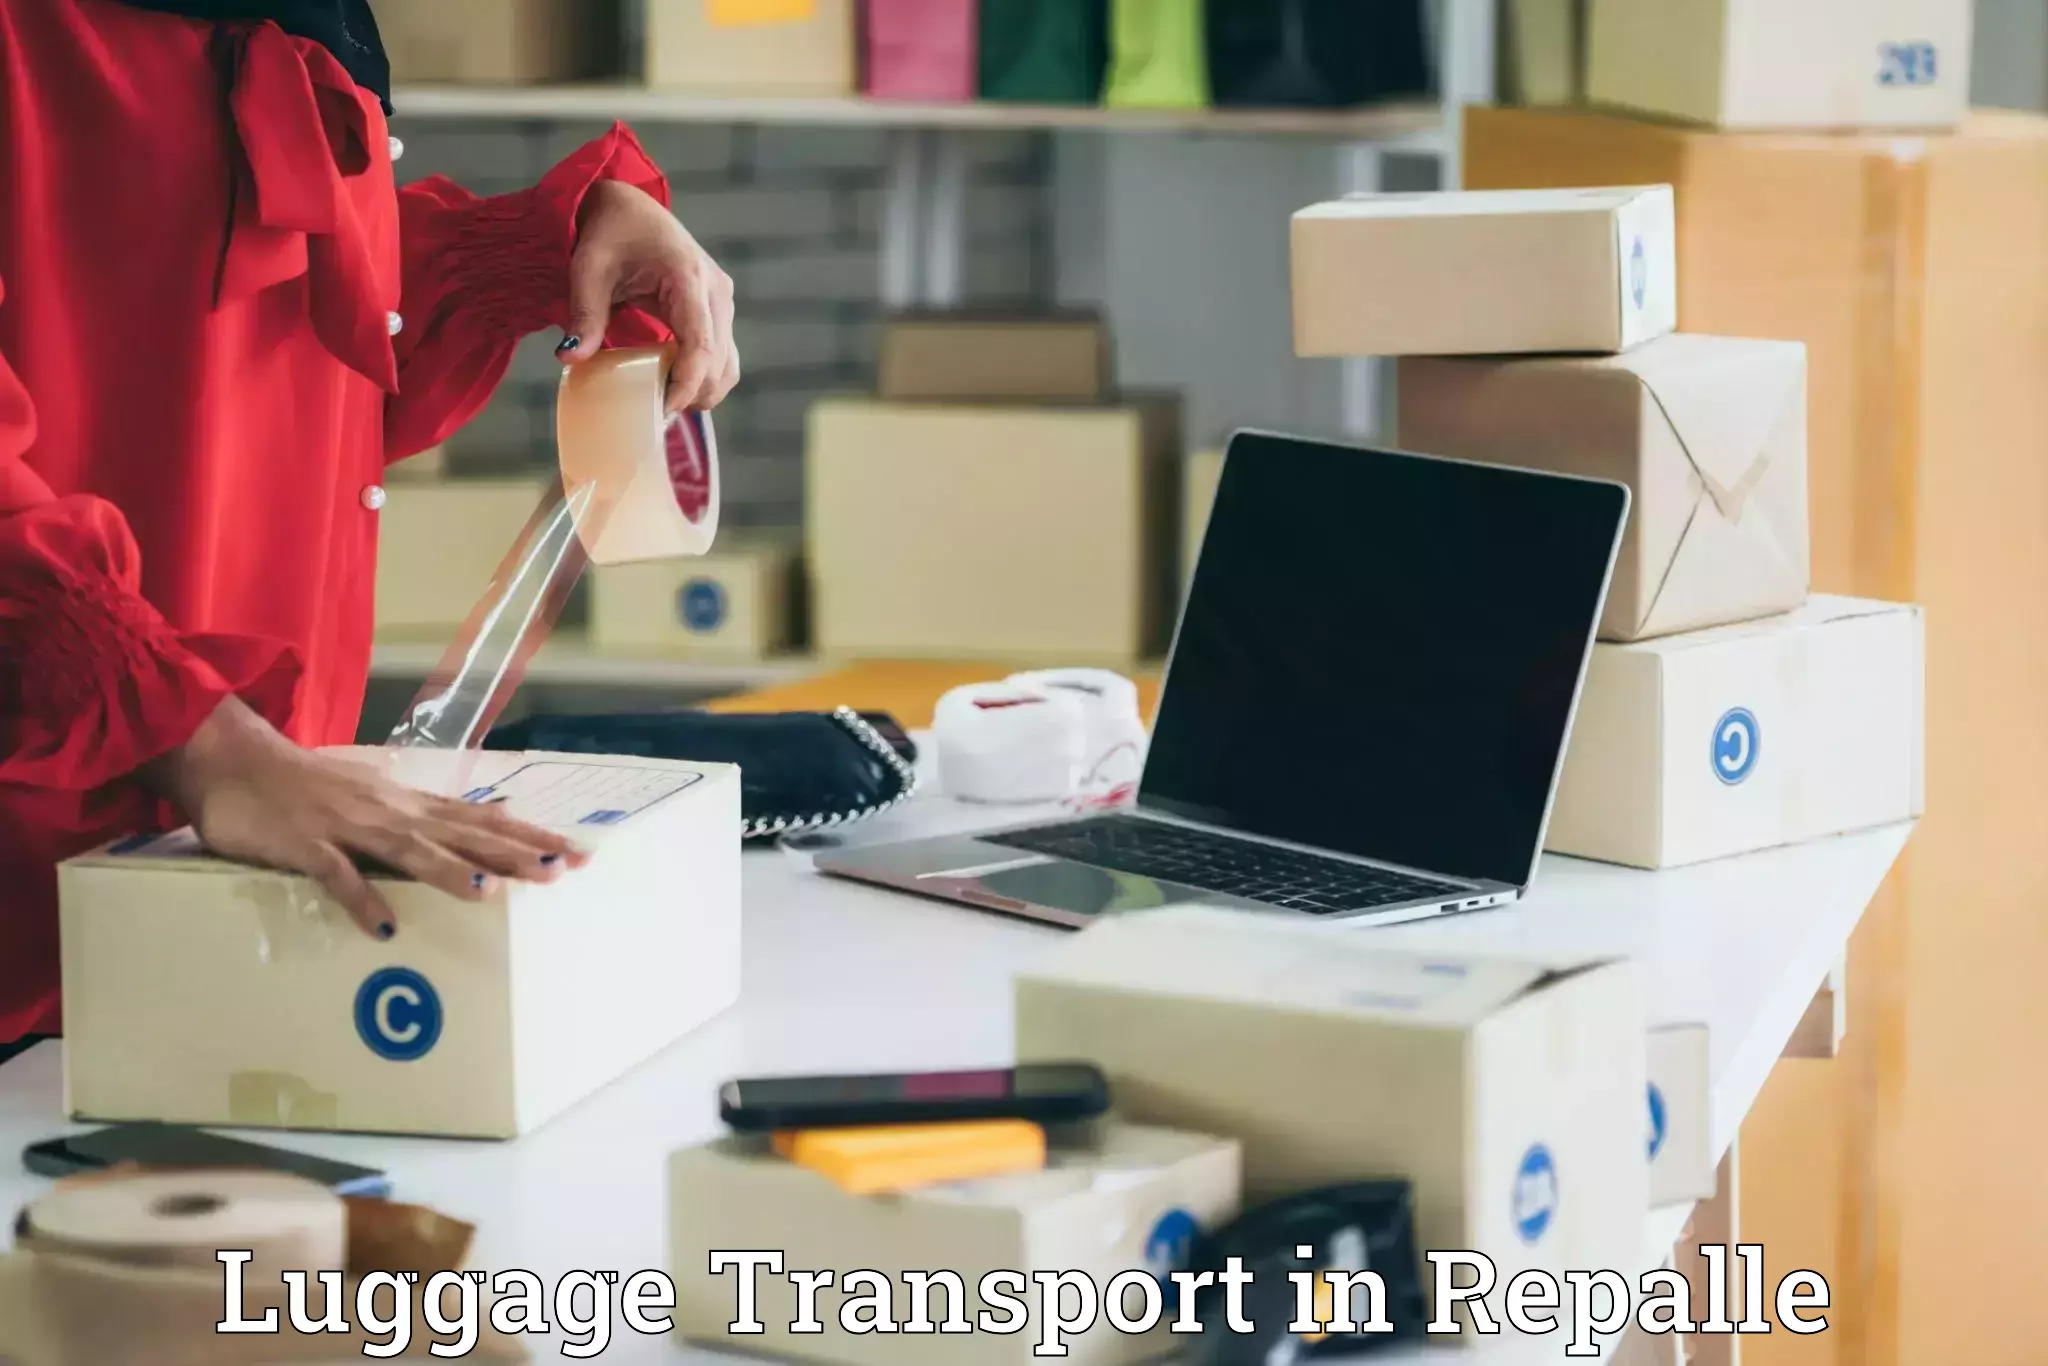 Professional baggage transport in Repalle